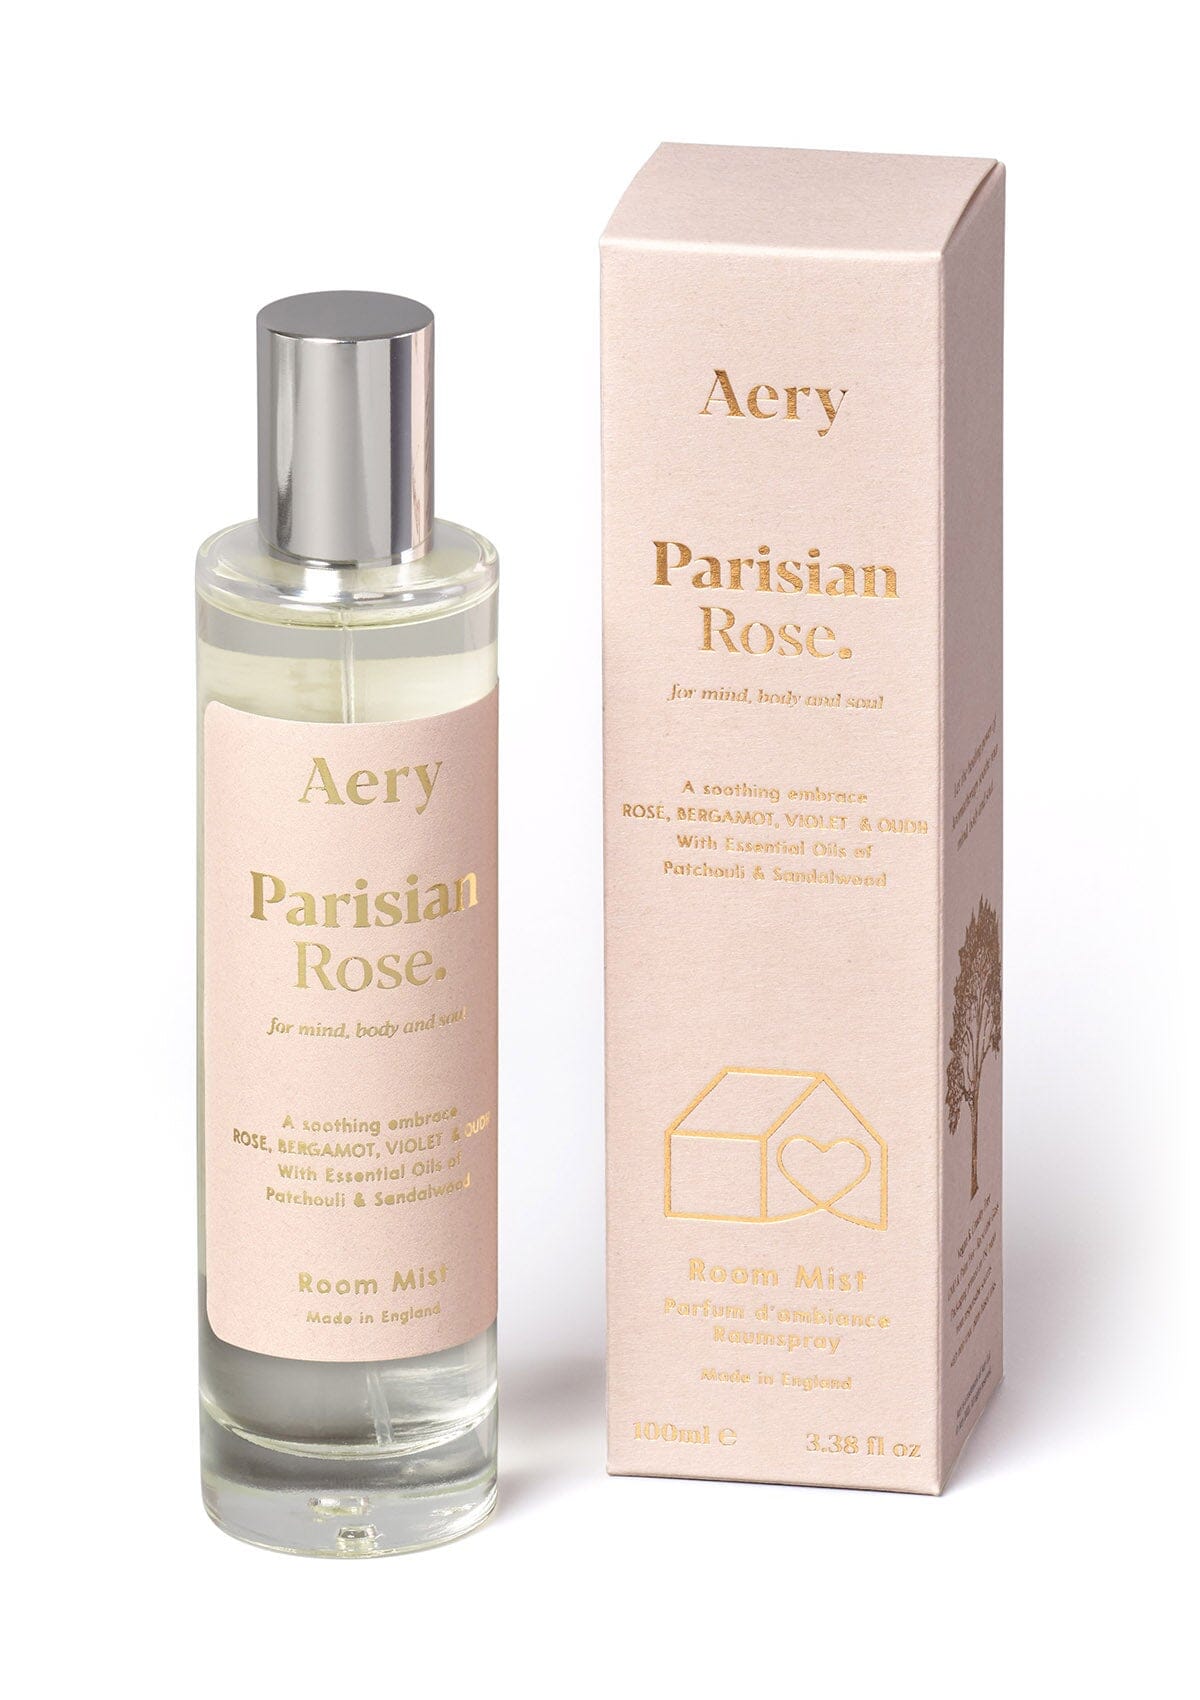 Pale pink Parisian Rose room mist displayed next to product packaging by Aery on white background 